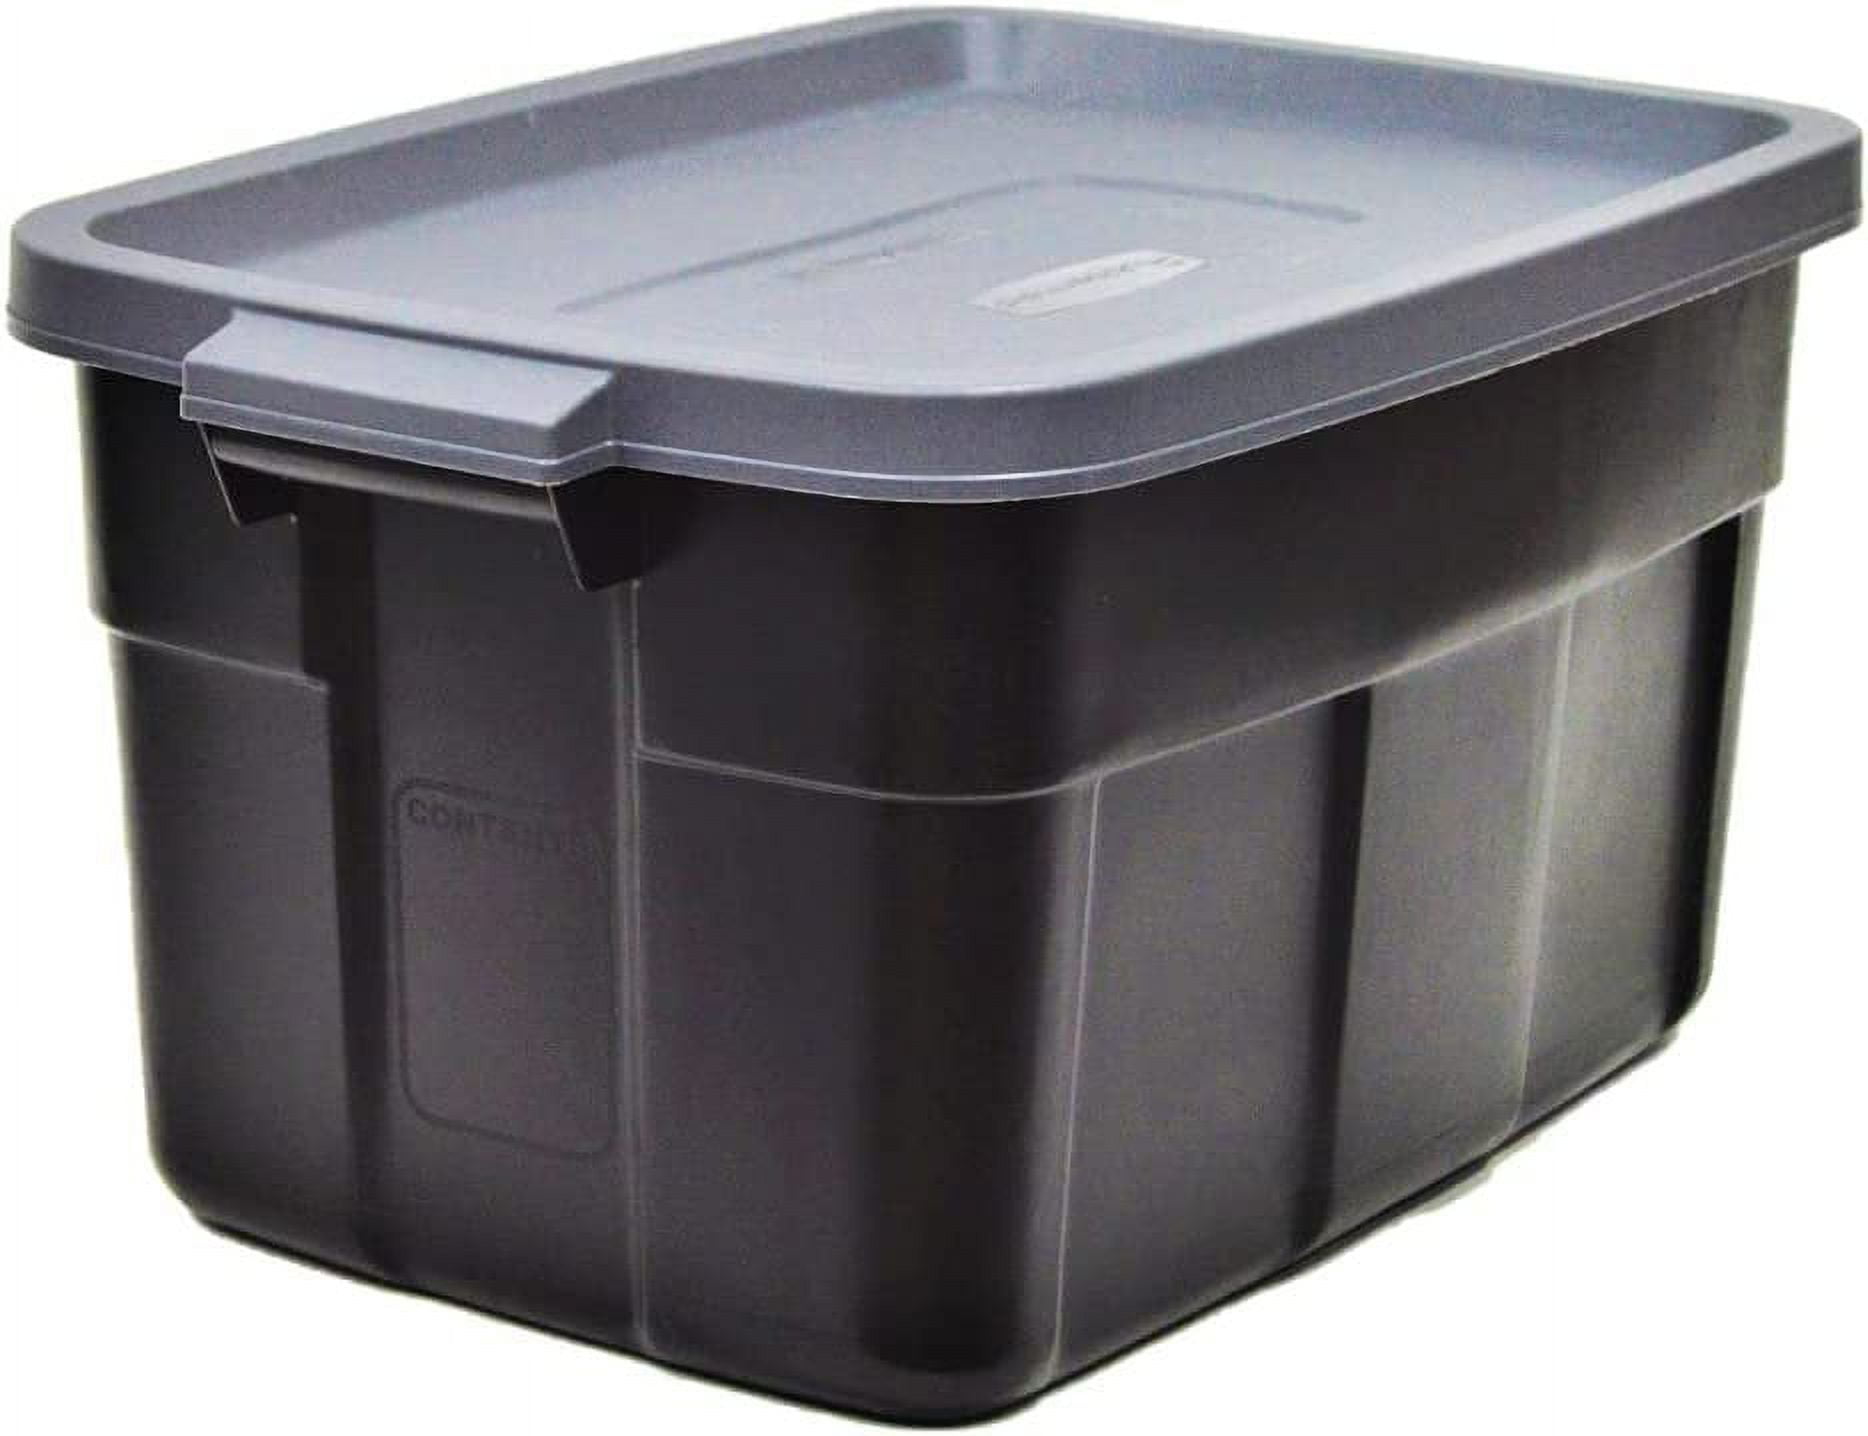  Rubbermaid Roughneck Clear 95 Qt/23.75 Gal Storage Containers,  Pack of 4 with Latching Grey Lids, Visible Base, Sturdy and Stackable,  Great for Storage and Organization : Health & Household